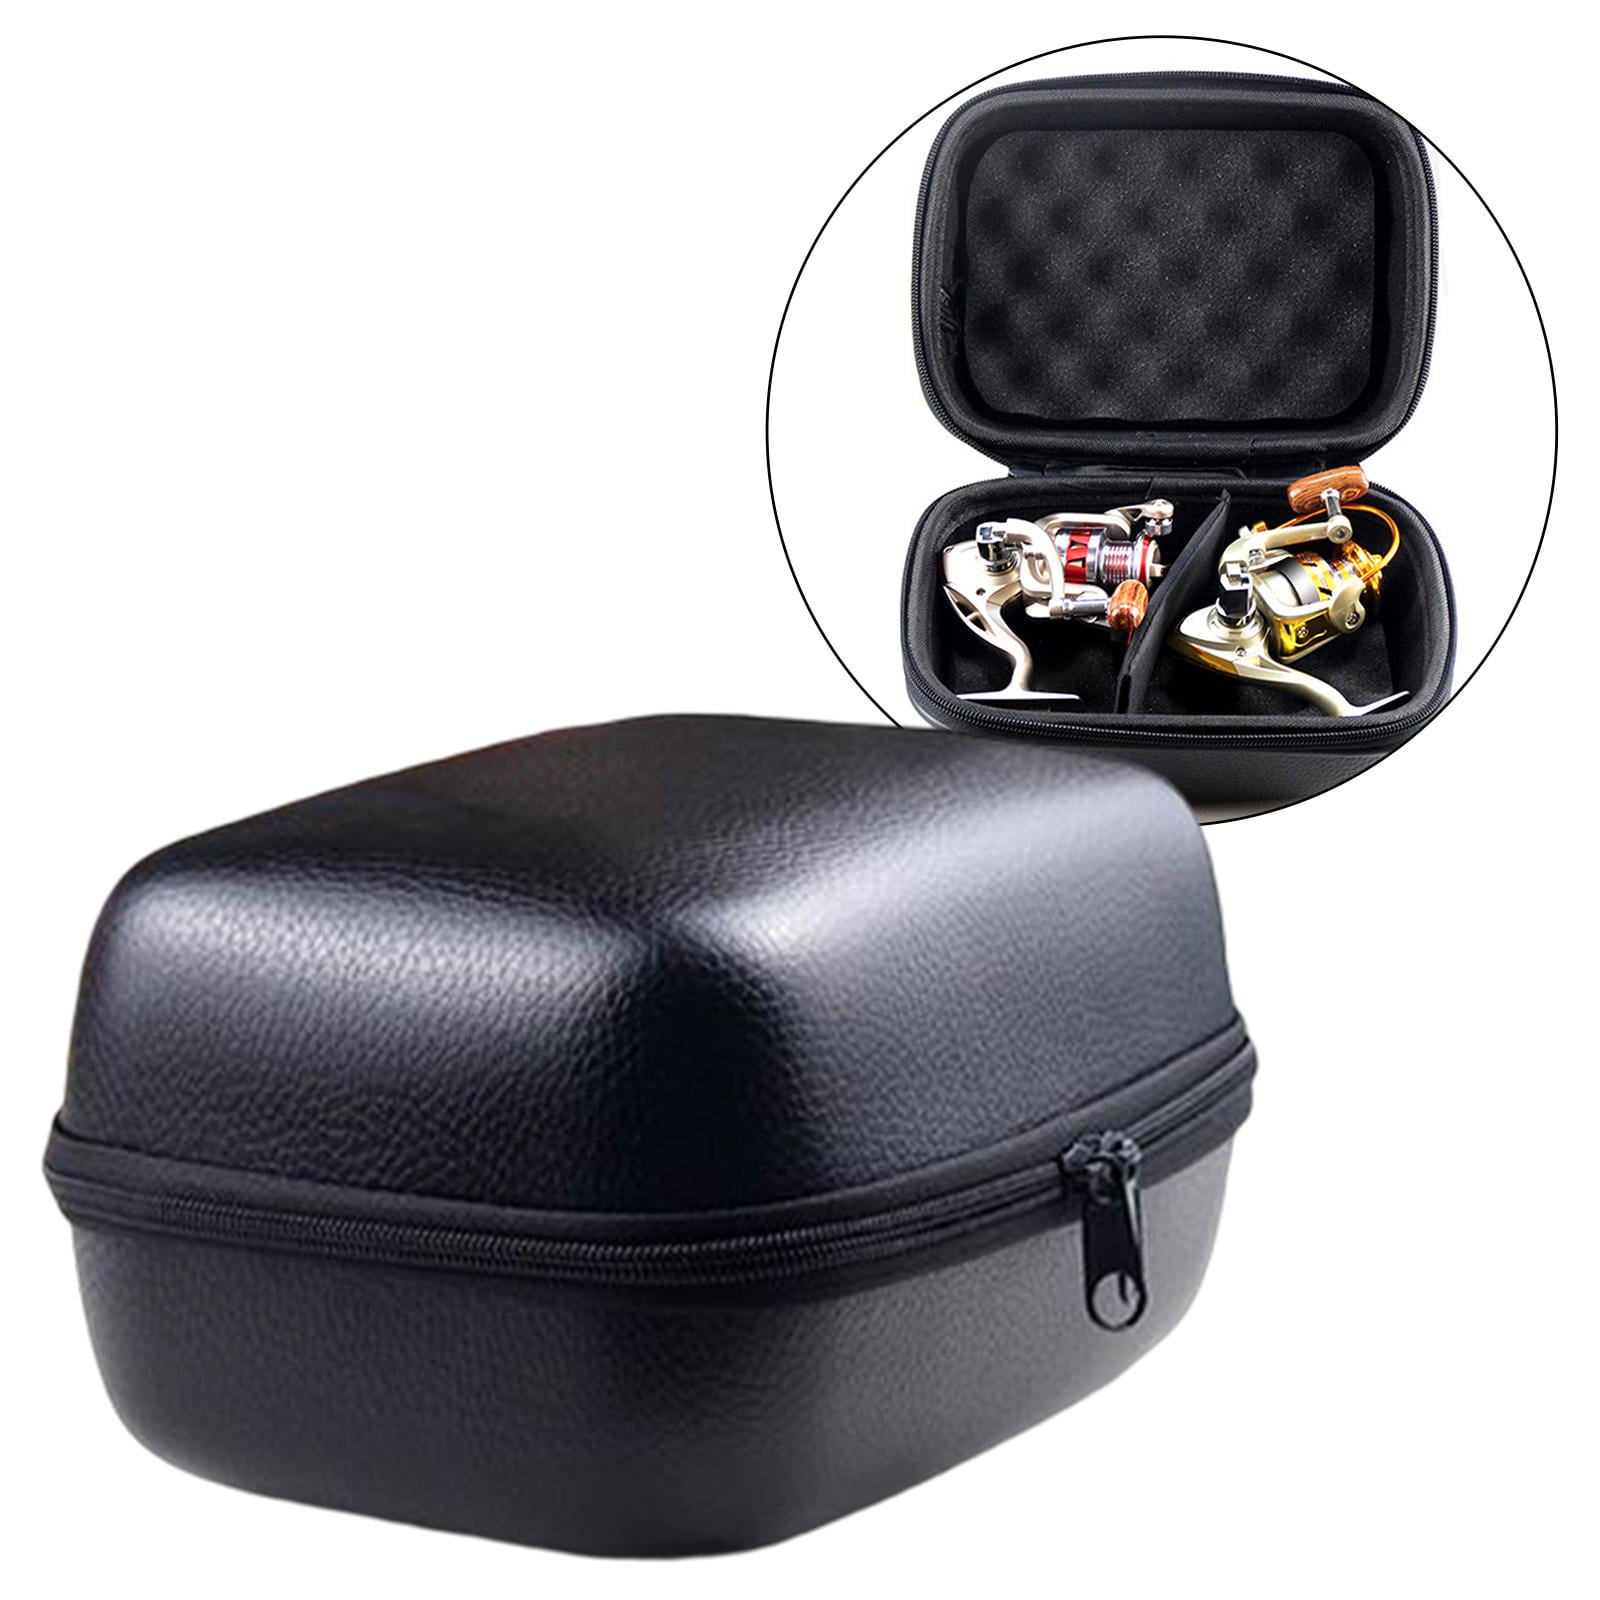 BASSKING Fishing Reel Bag Protective Case for Spinning Wheel Neoprene  Fishing Reel Cover Pouch Storage Bag Fits 1000 to 4000